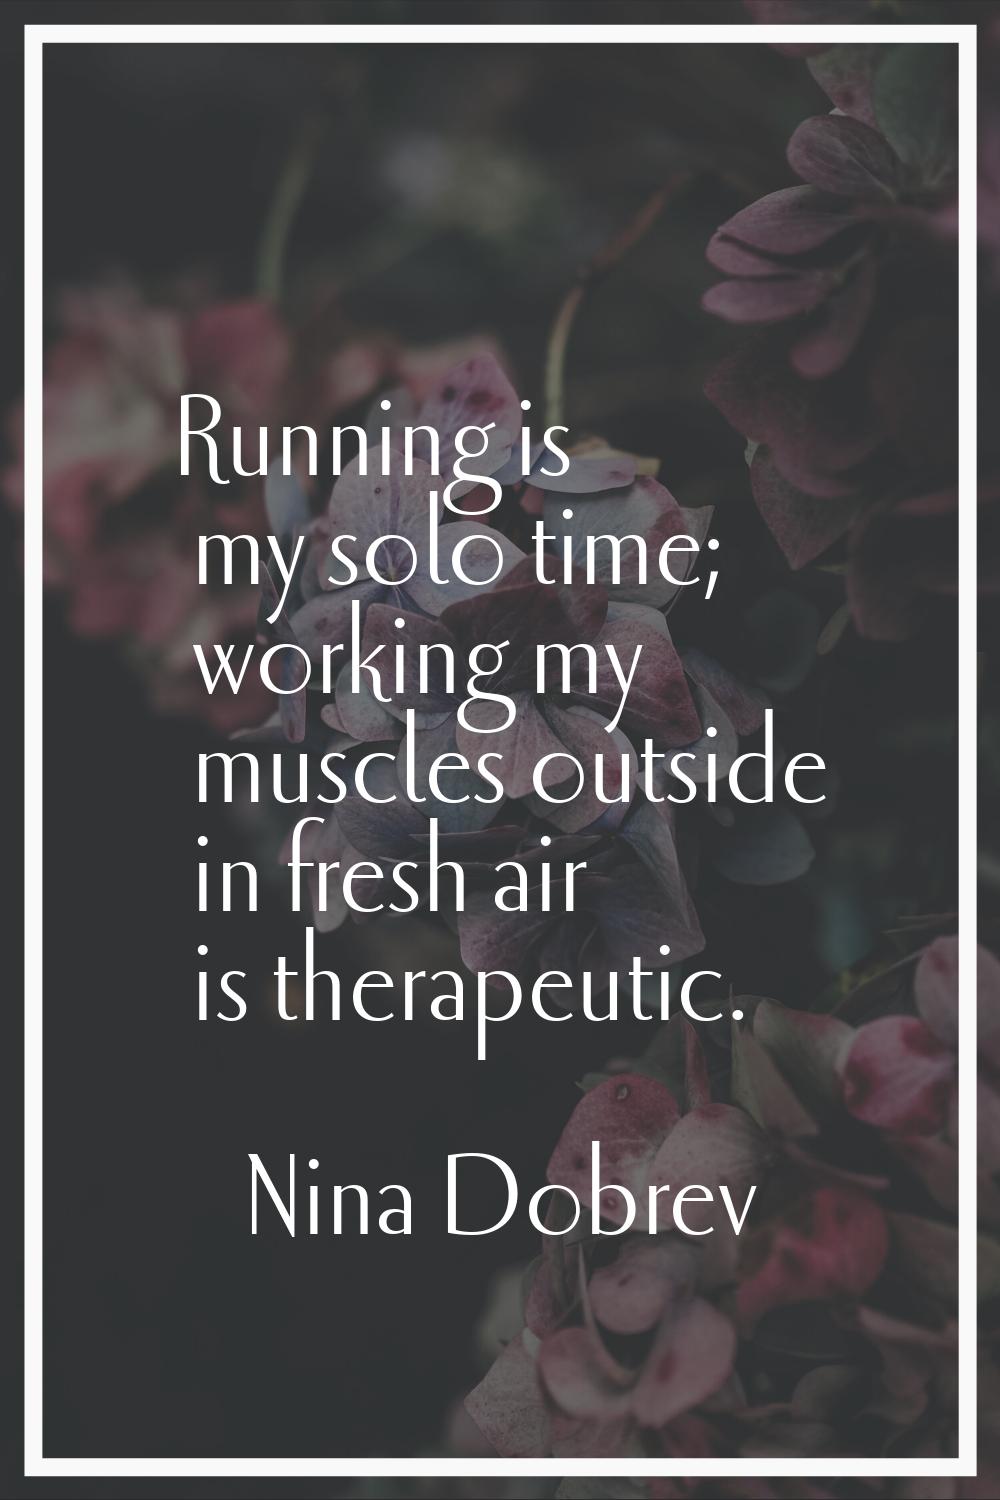 Running is my solo time; working my muscles outside in fresh air is therapeutic.